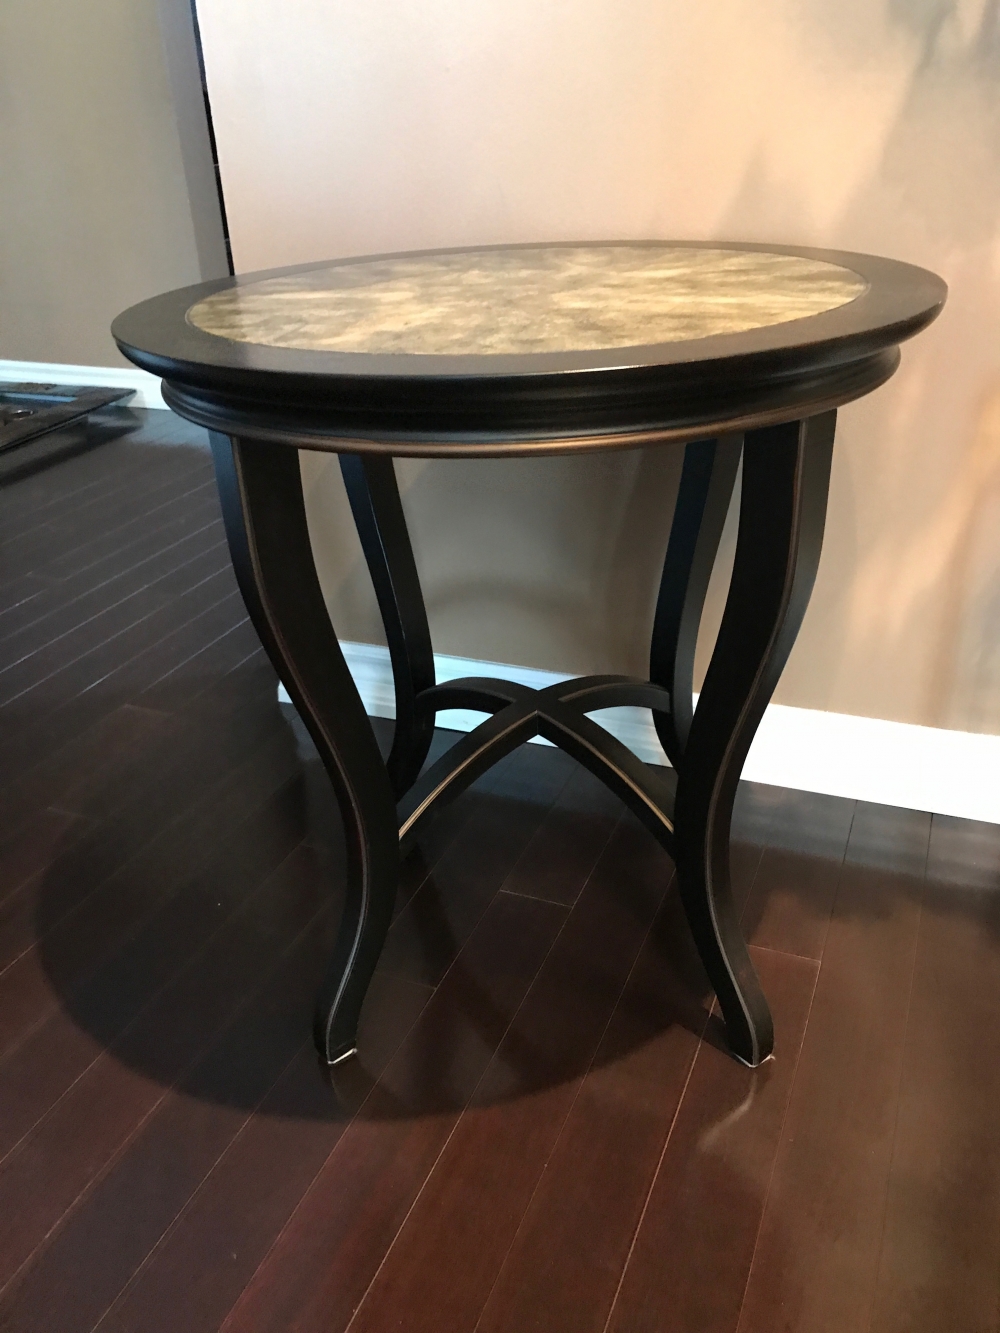 small accent table nesting tables iron and glass coffee build wood west elm lamps dale tiffany ceiling kitchen bistro set tyndall furniture white gallerie lighting decorative